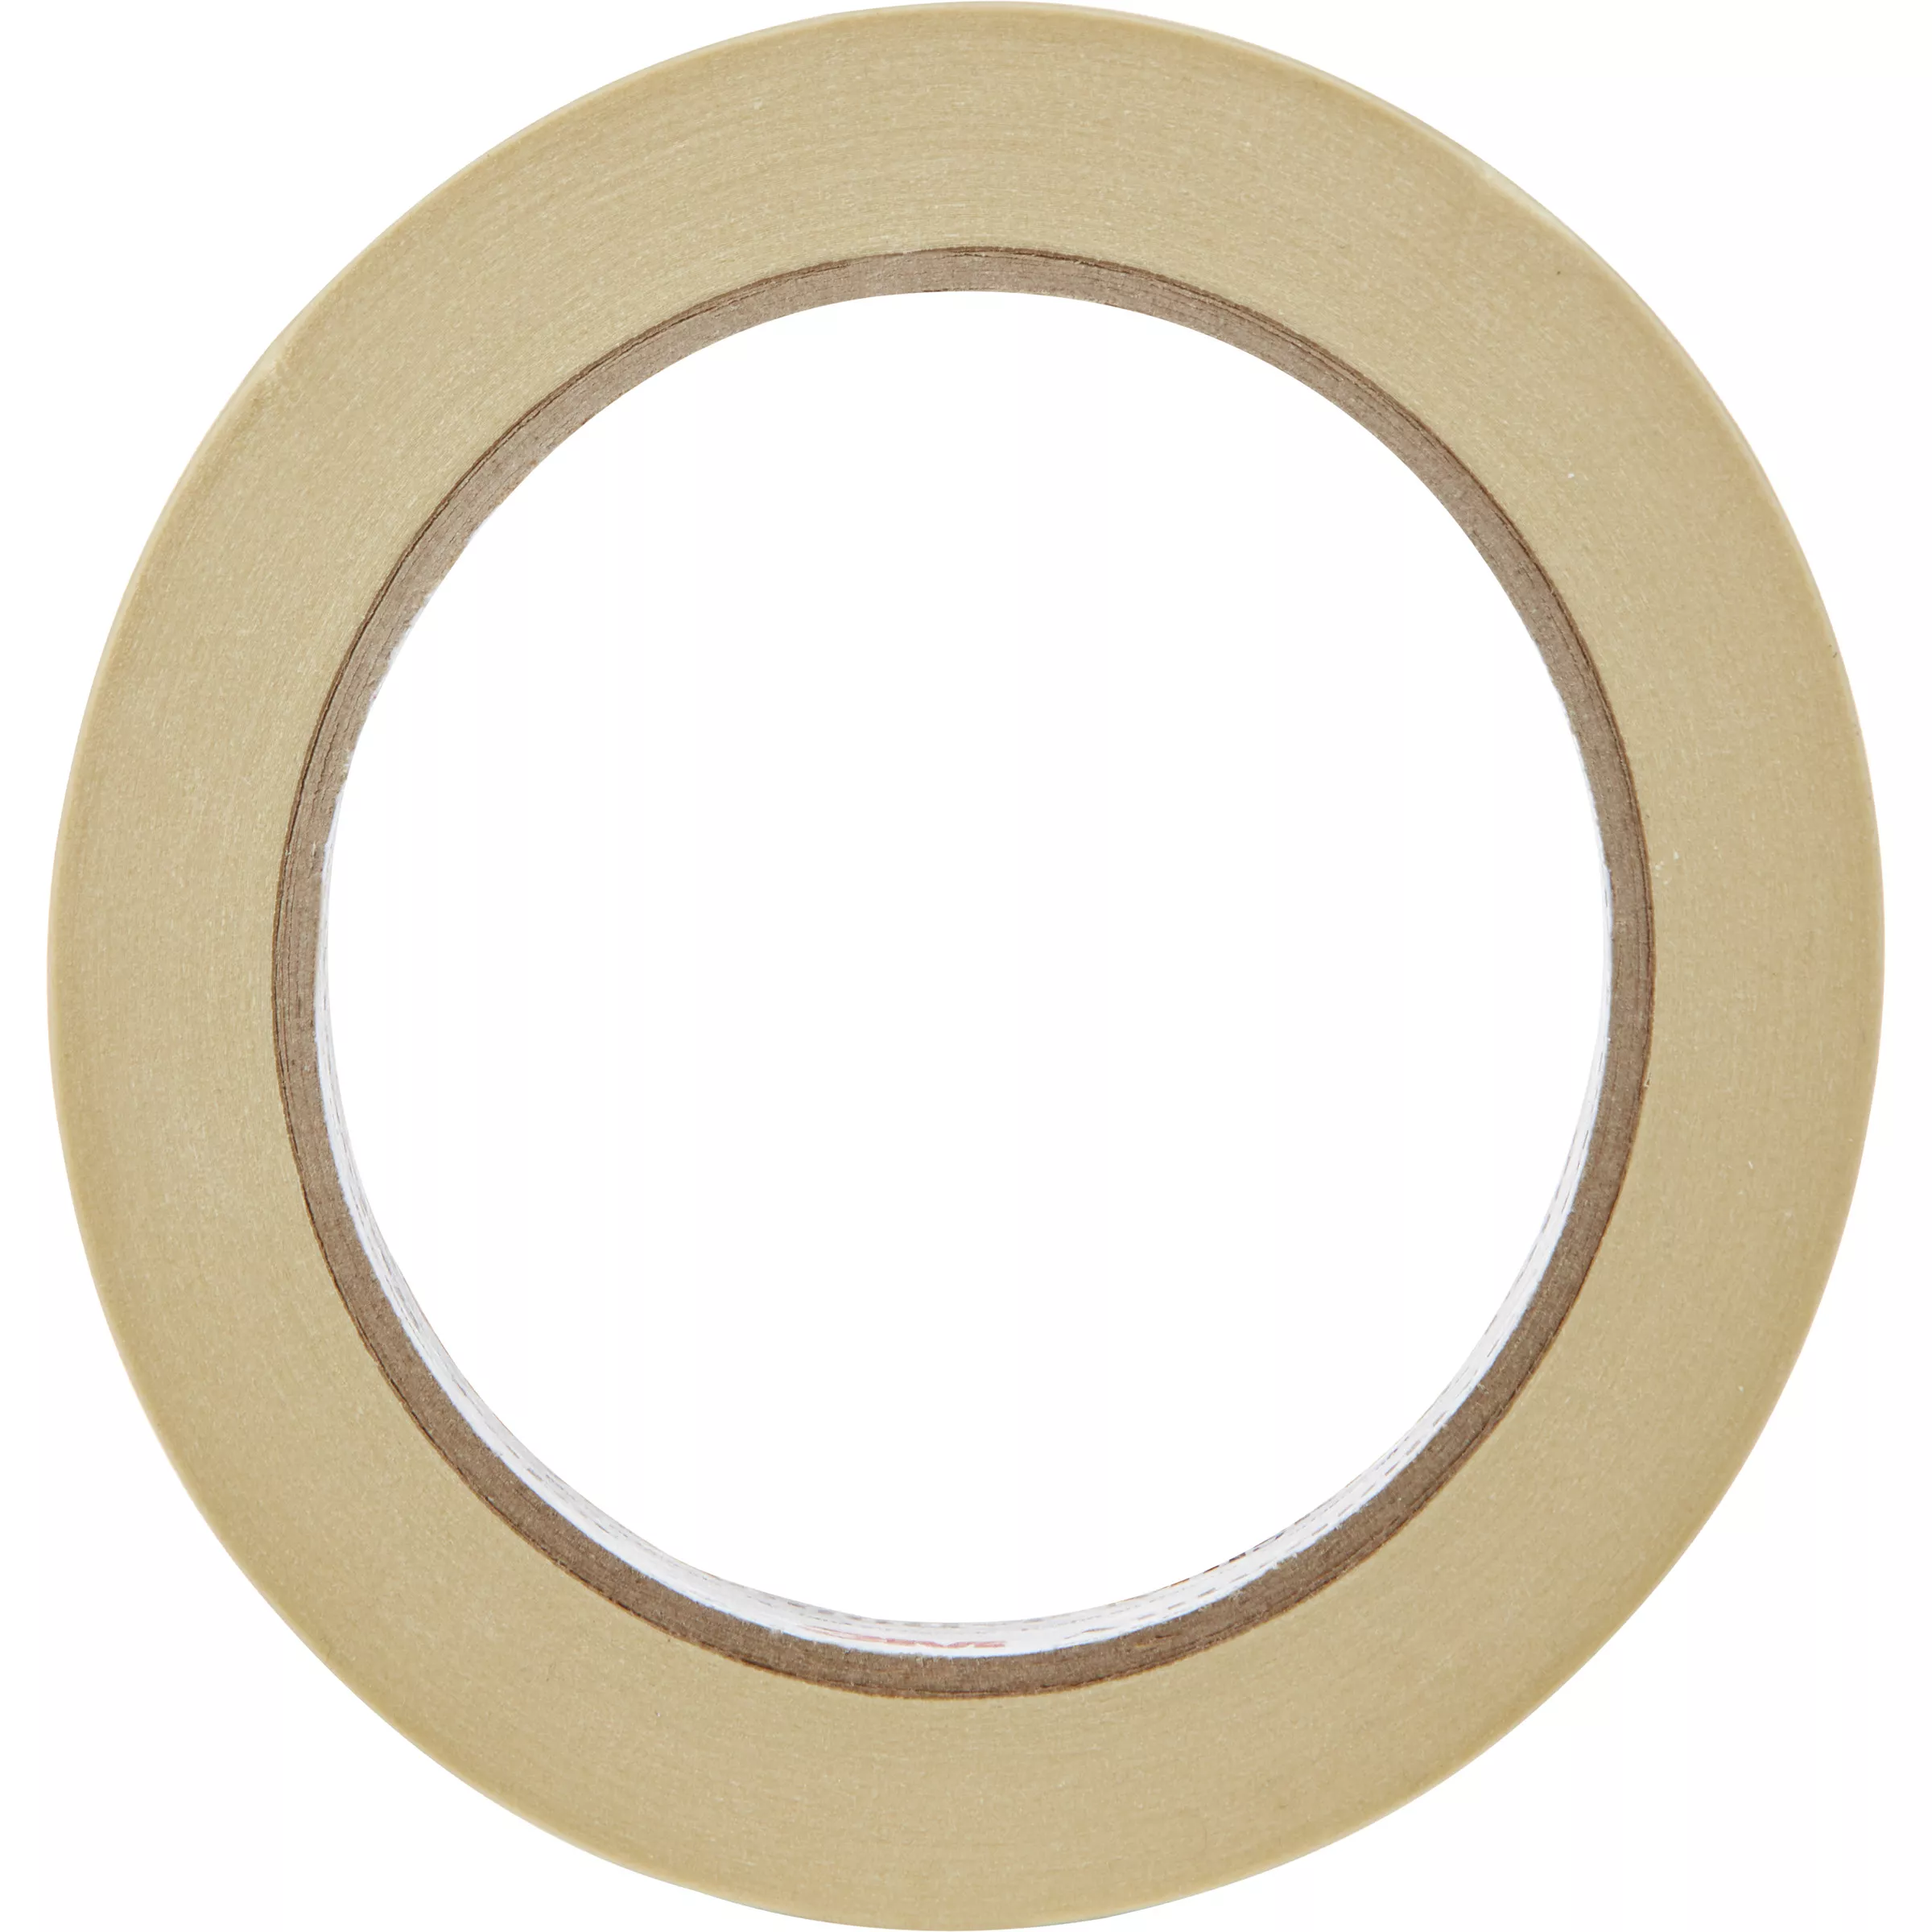 Product Number 03432ESF | 3M™ Automotive Masking Tape 03432ESF